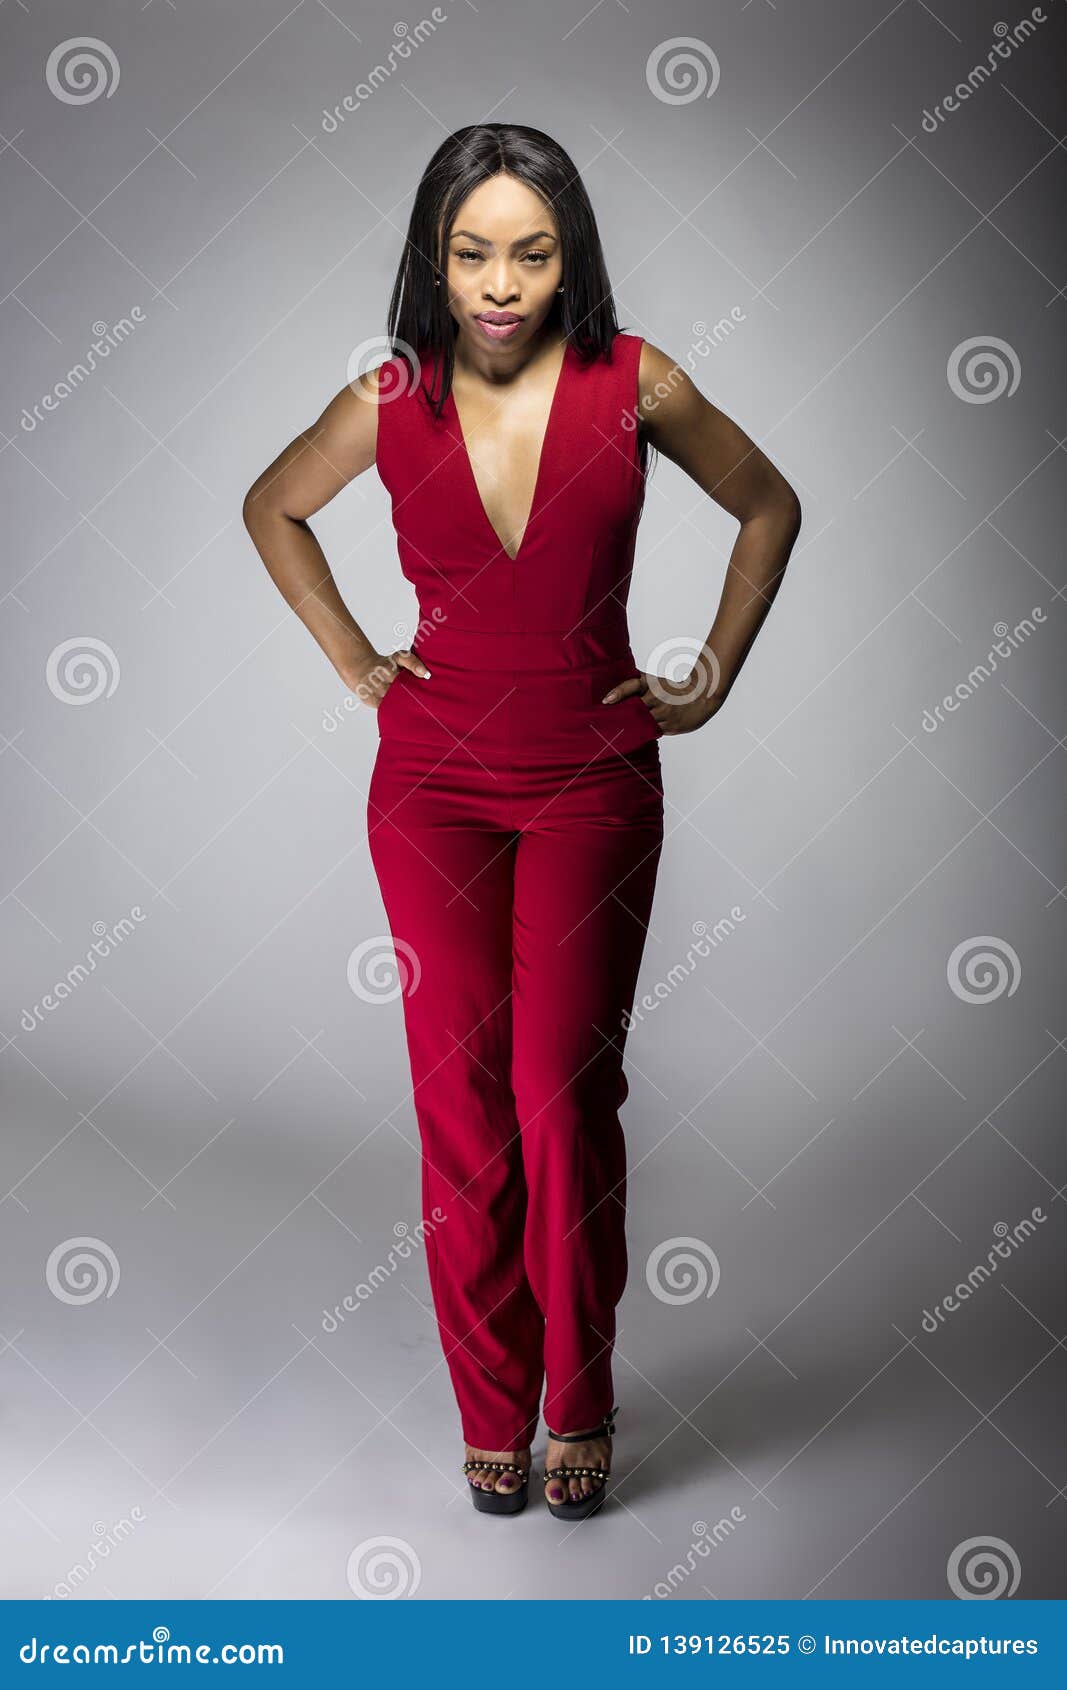 Black Female Wearing Red Fashion Apparel Stock Image - Image of casual ...